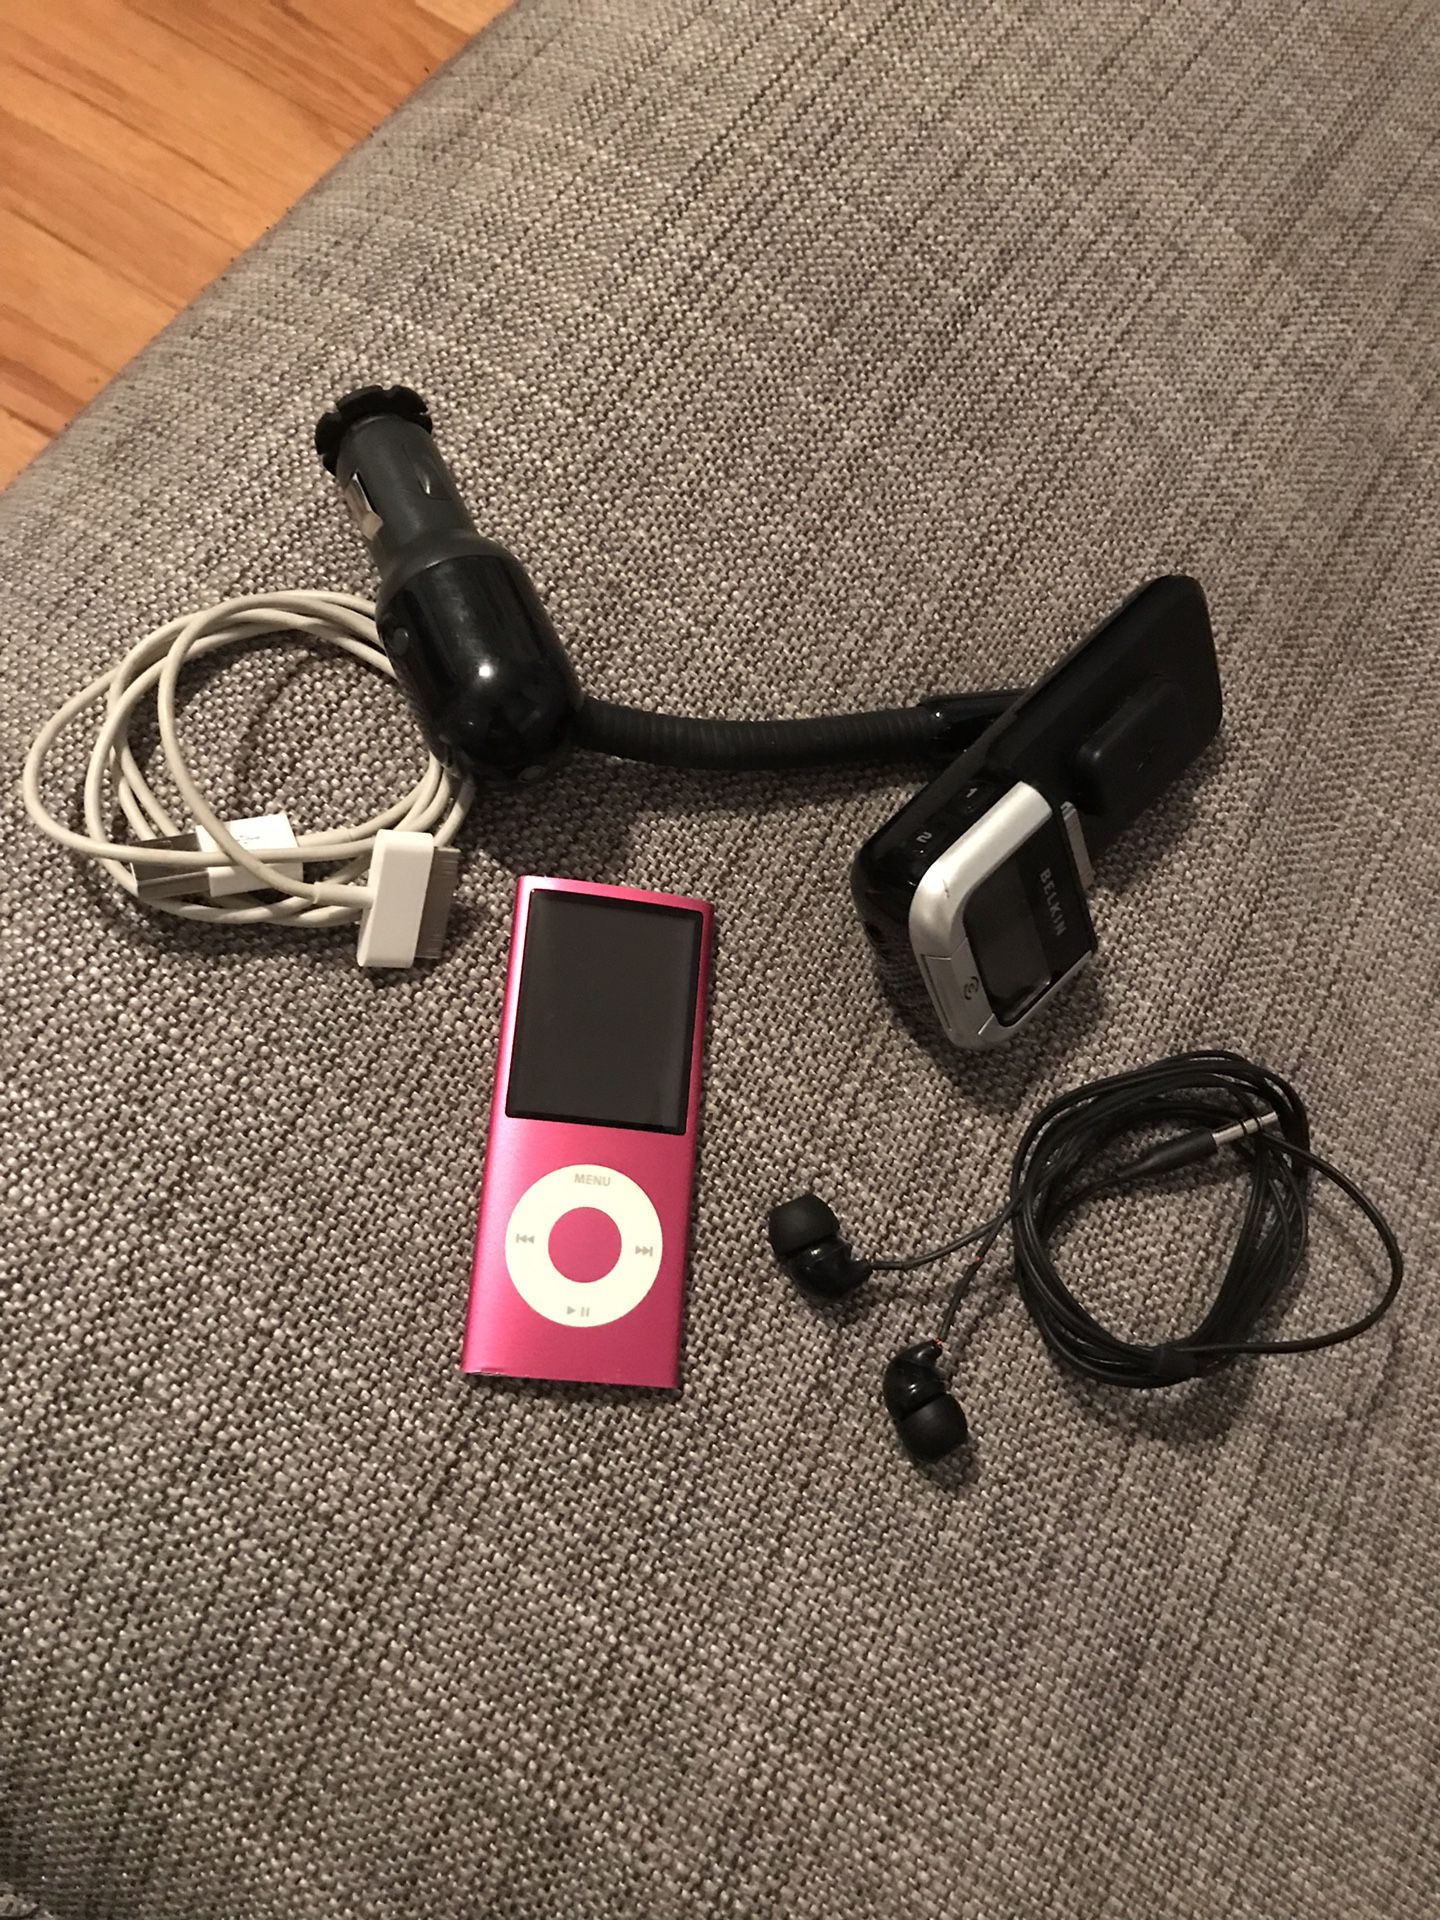 IPod Nano 16G with charger, headphones and car charger